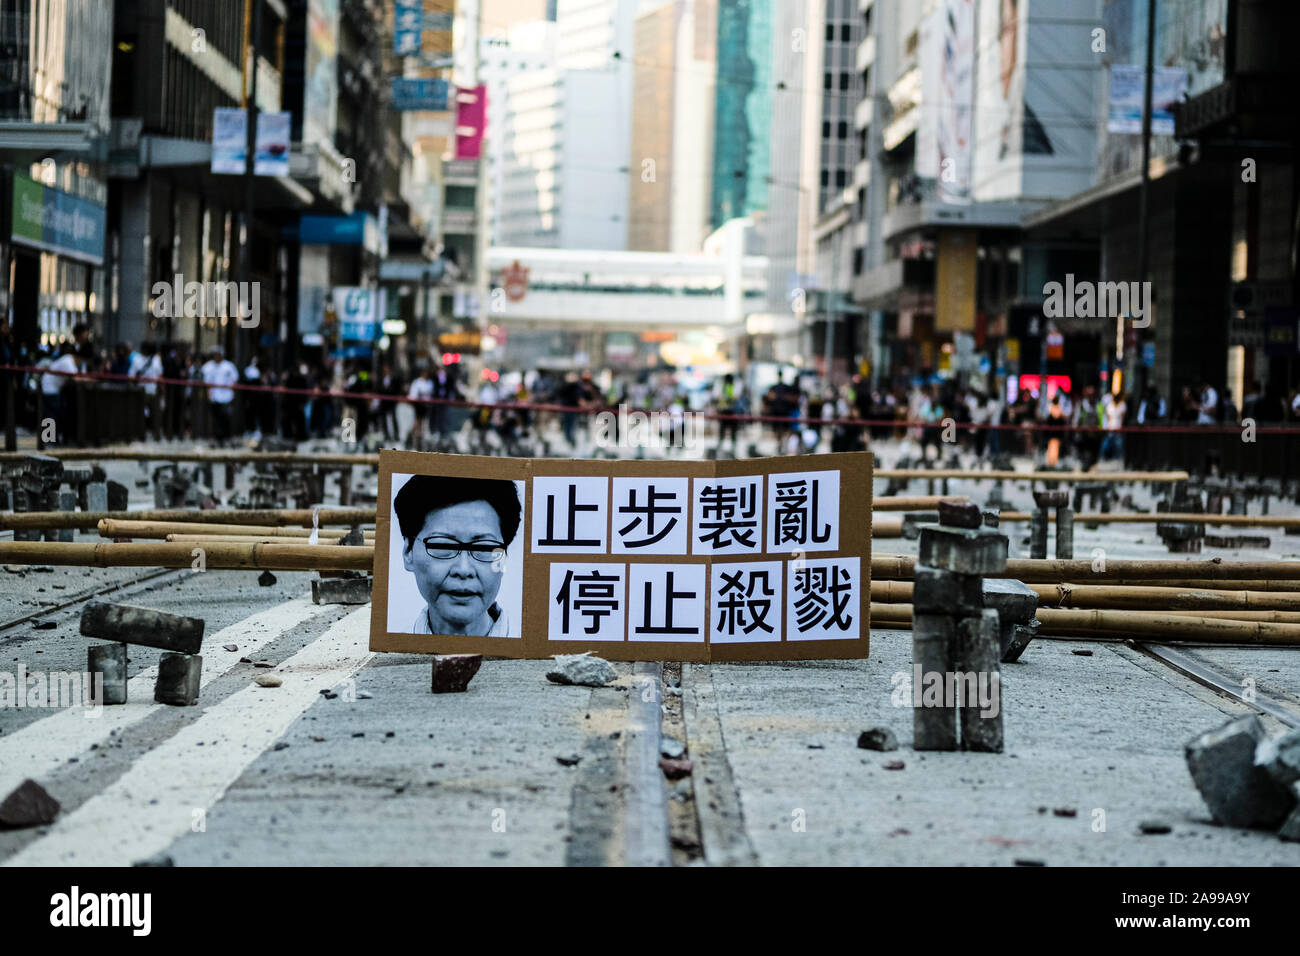 Hong Kong, China. 13th Nov, 2019. Demonstrators set up bricks to block traffic during a protest in the Central district Hong Kong. A 'Blossom Everywhere' action was organized by the protestors to paralyze traffic and vandalize things across Hong Kong for its third consecutive days and have sparked some of the worst violence in five months of unrest. Credit: SOPA Images Limited/Alamy Live News Stock Photo